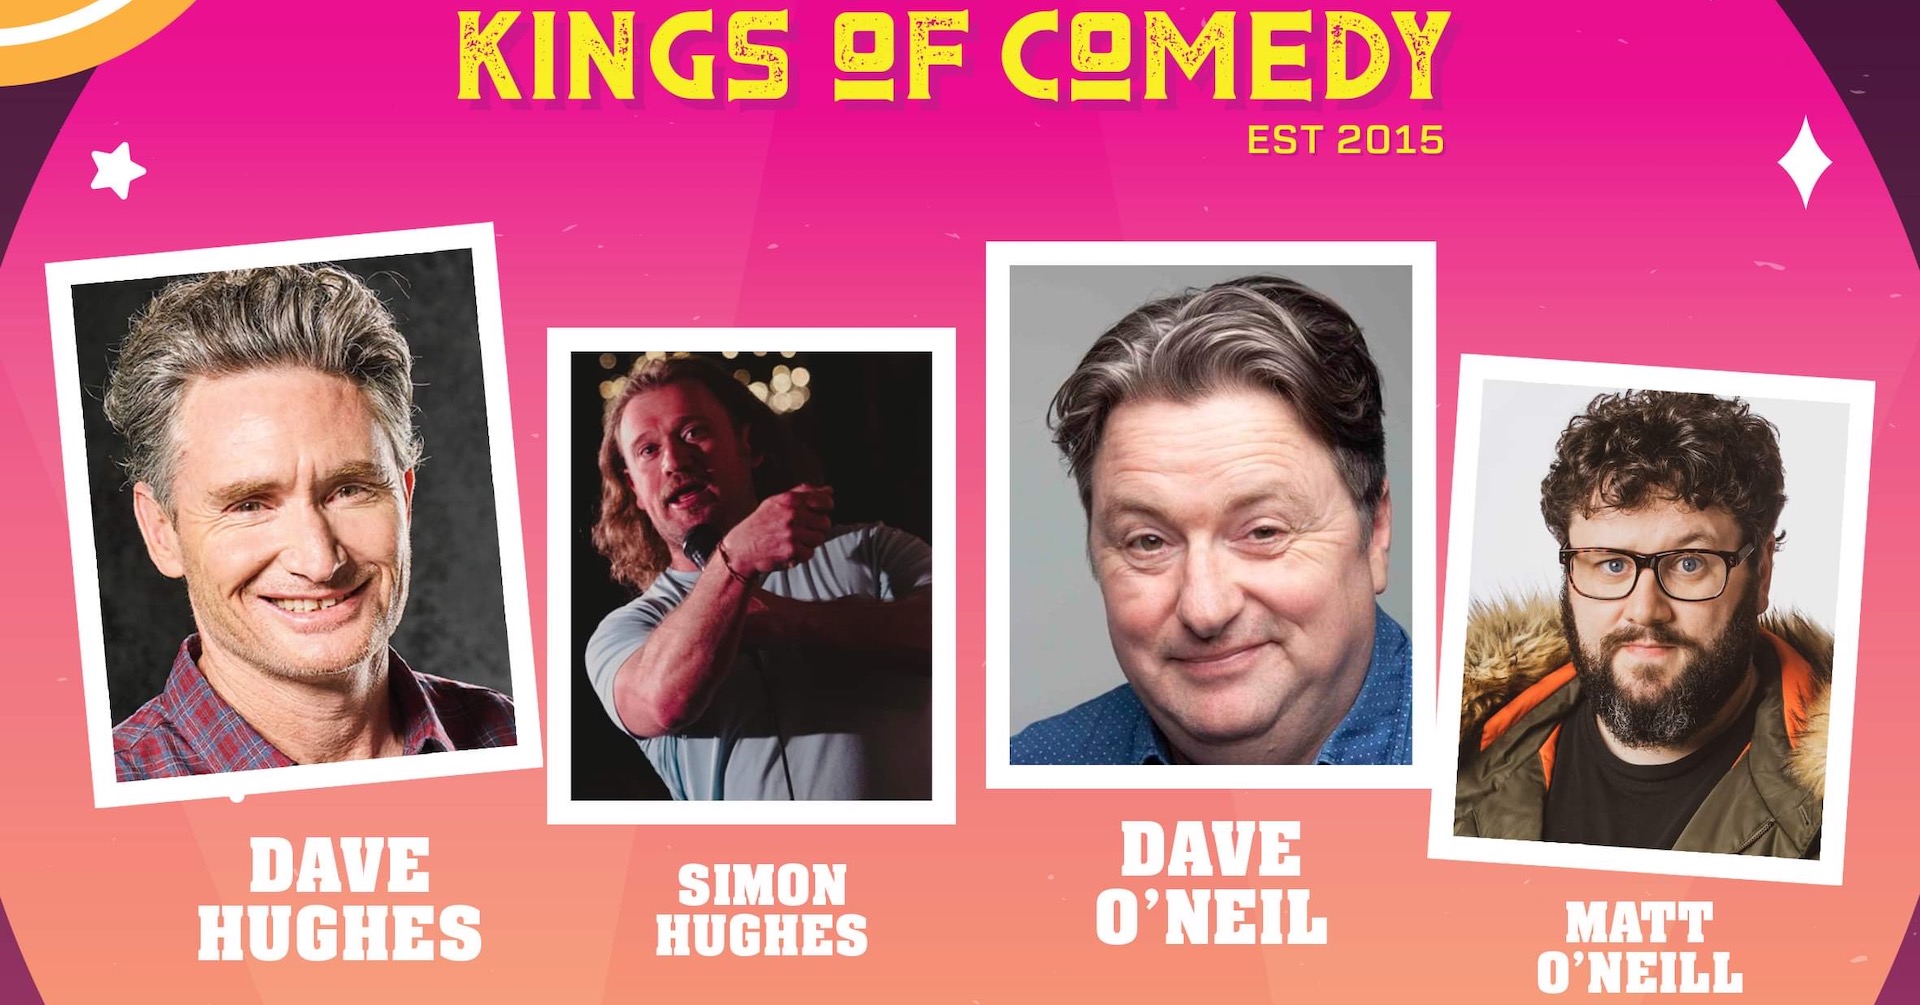 Kings of Comedy's 7th Year Celebration